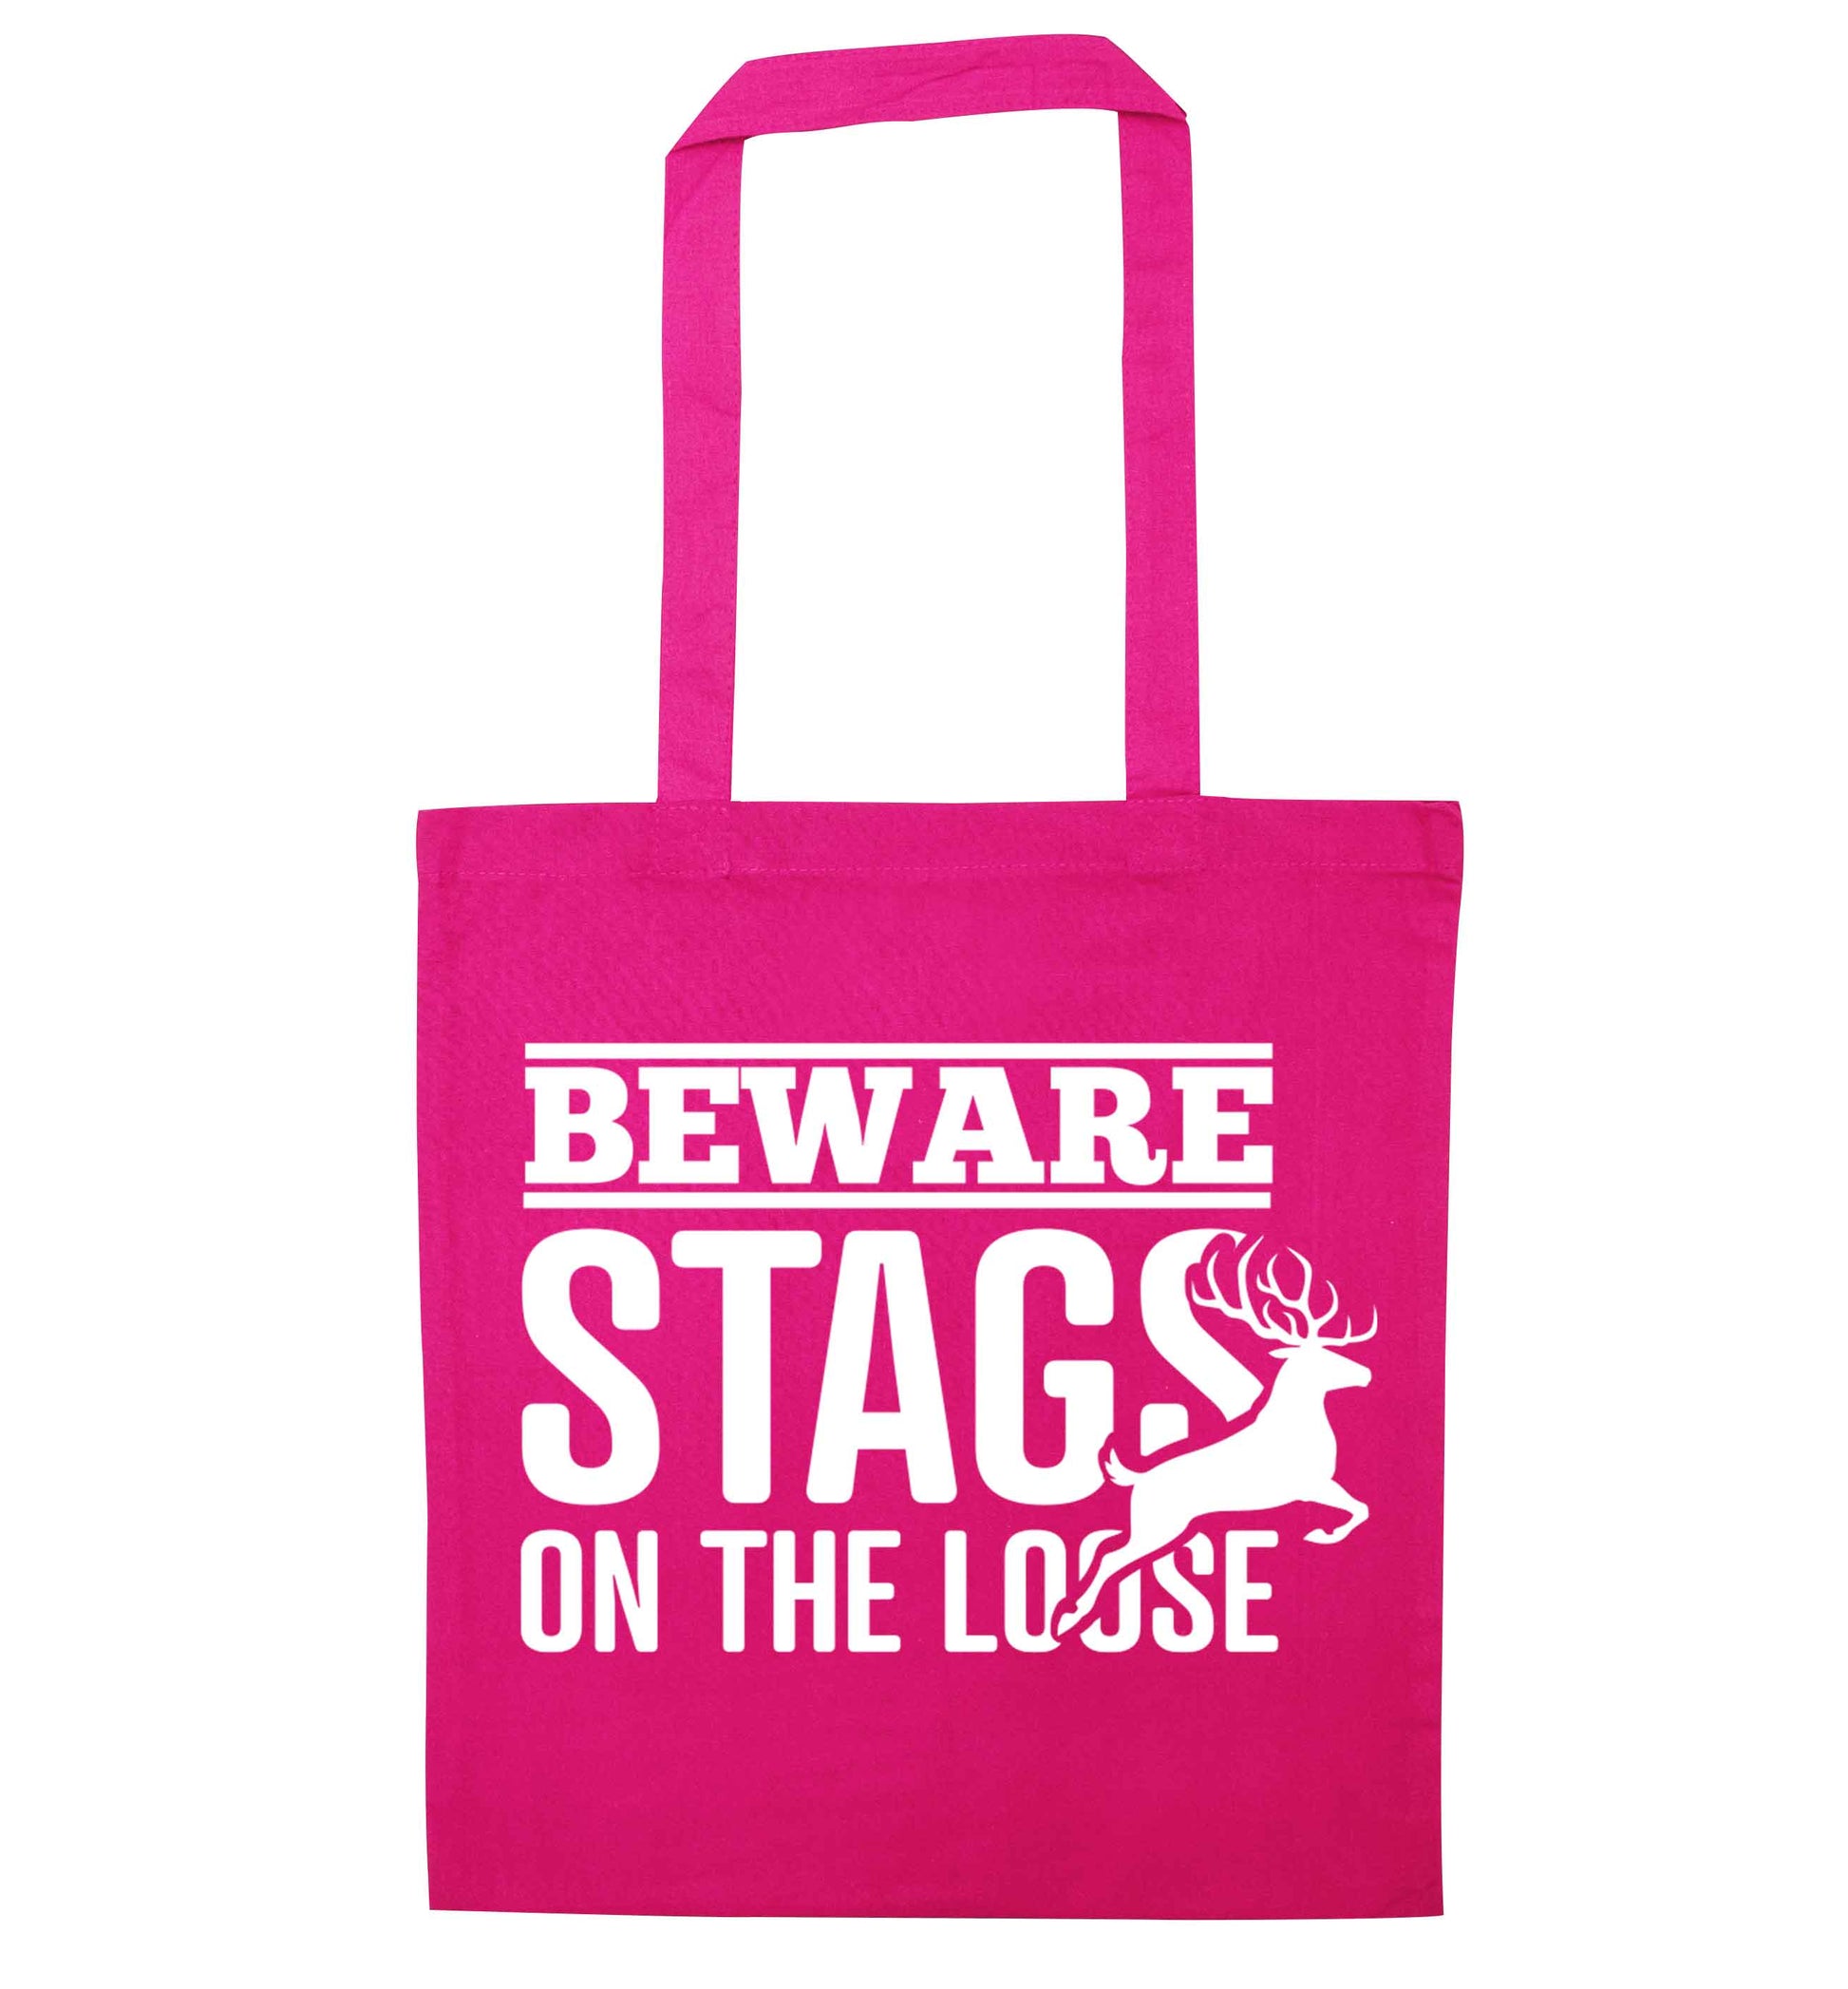 Beware stags on the loose pink tote bag